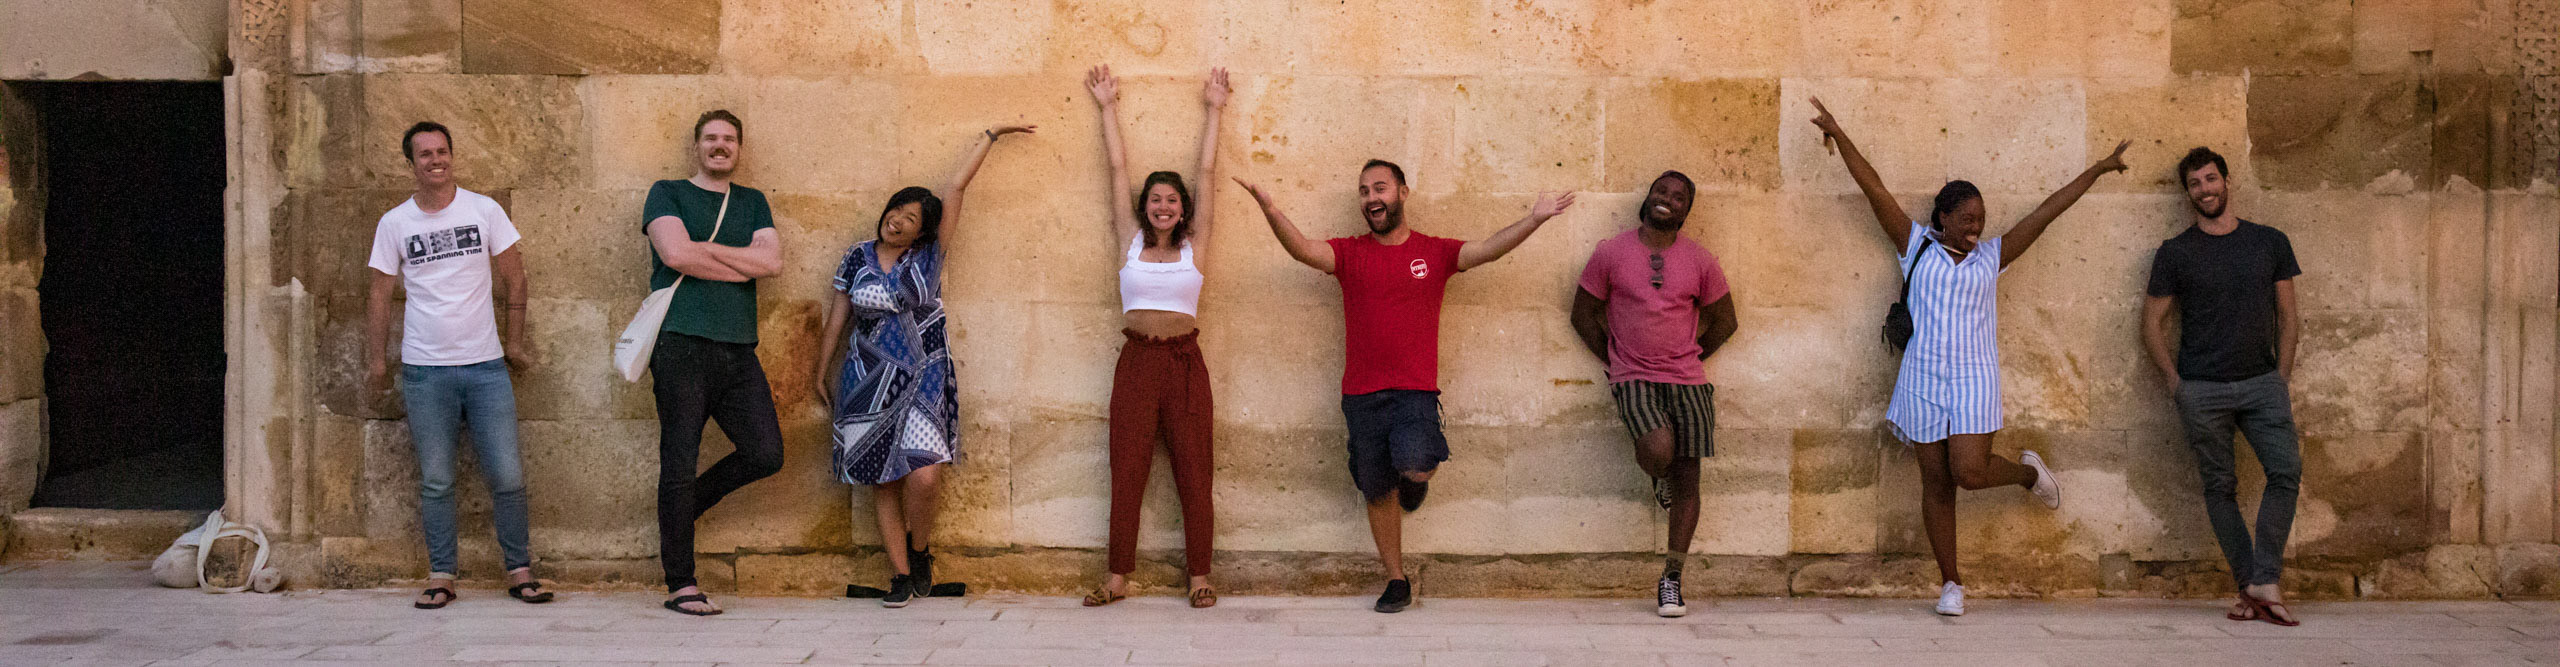 Group having a photo taken with arms outstretched in Goreme, Turkey 